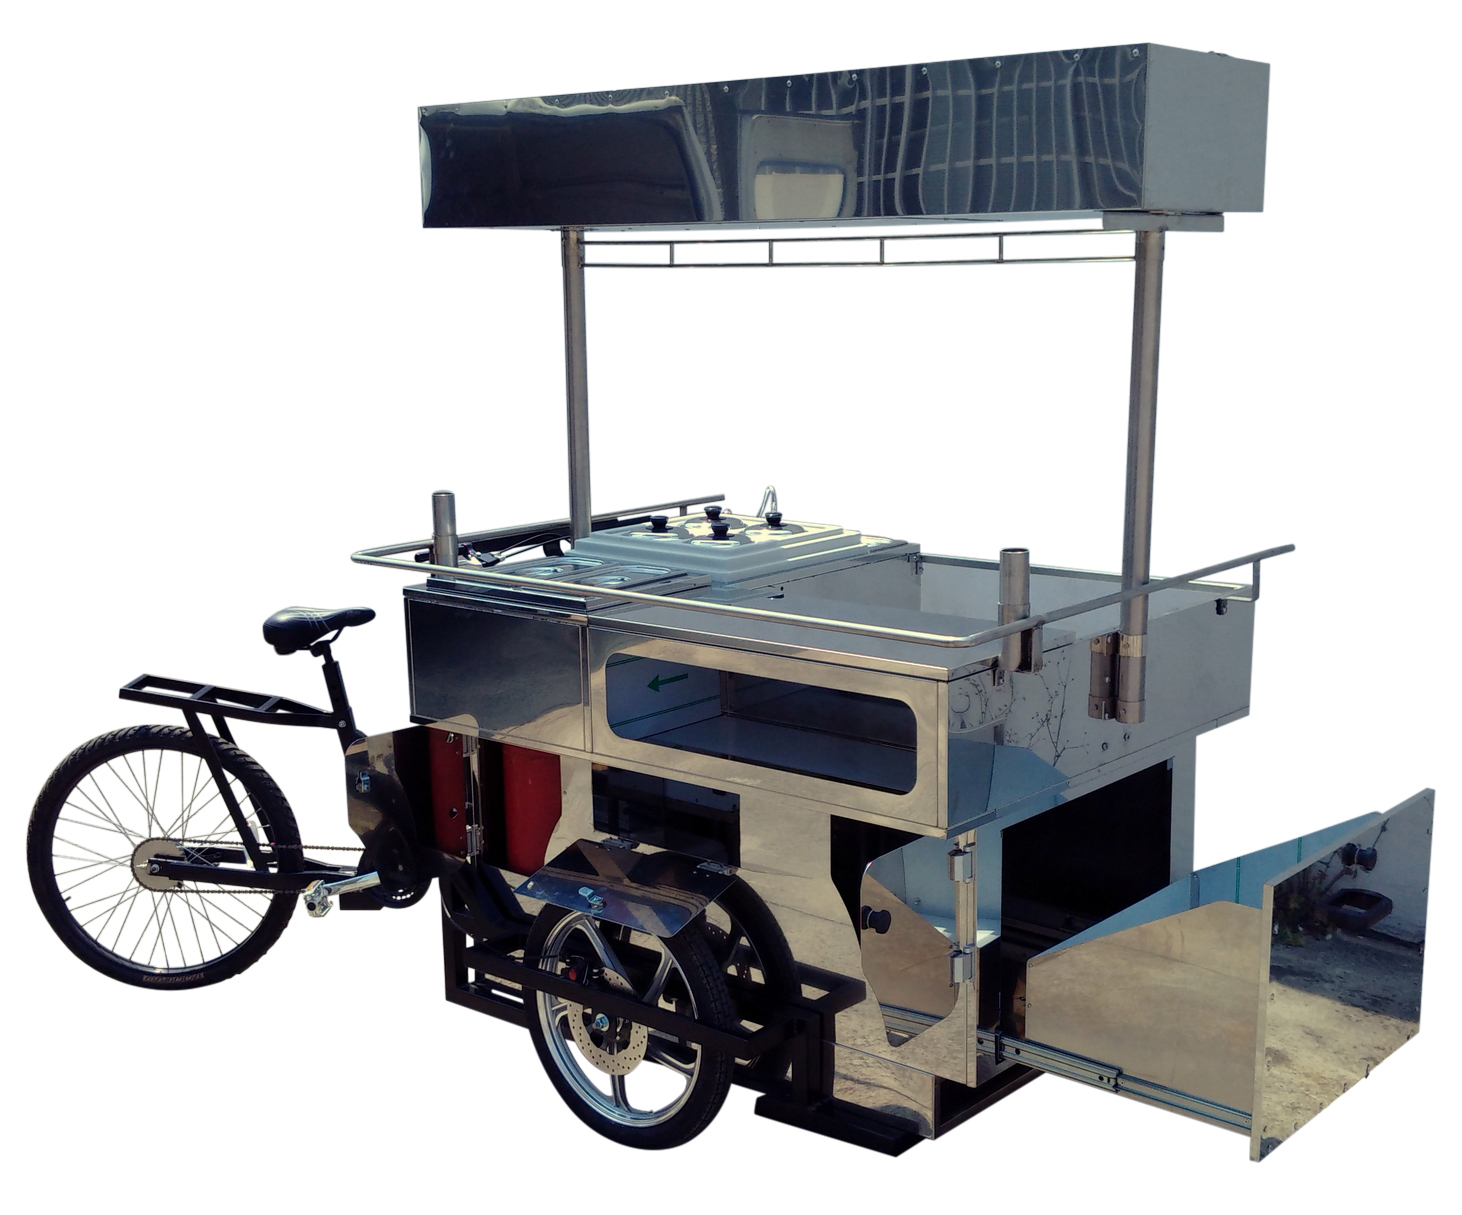 STREET_FOOD_BIKE_CHEF_ON_TRICYCLE_FOR_COOKING_IN_STREET_KITCHEN_3